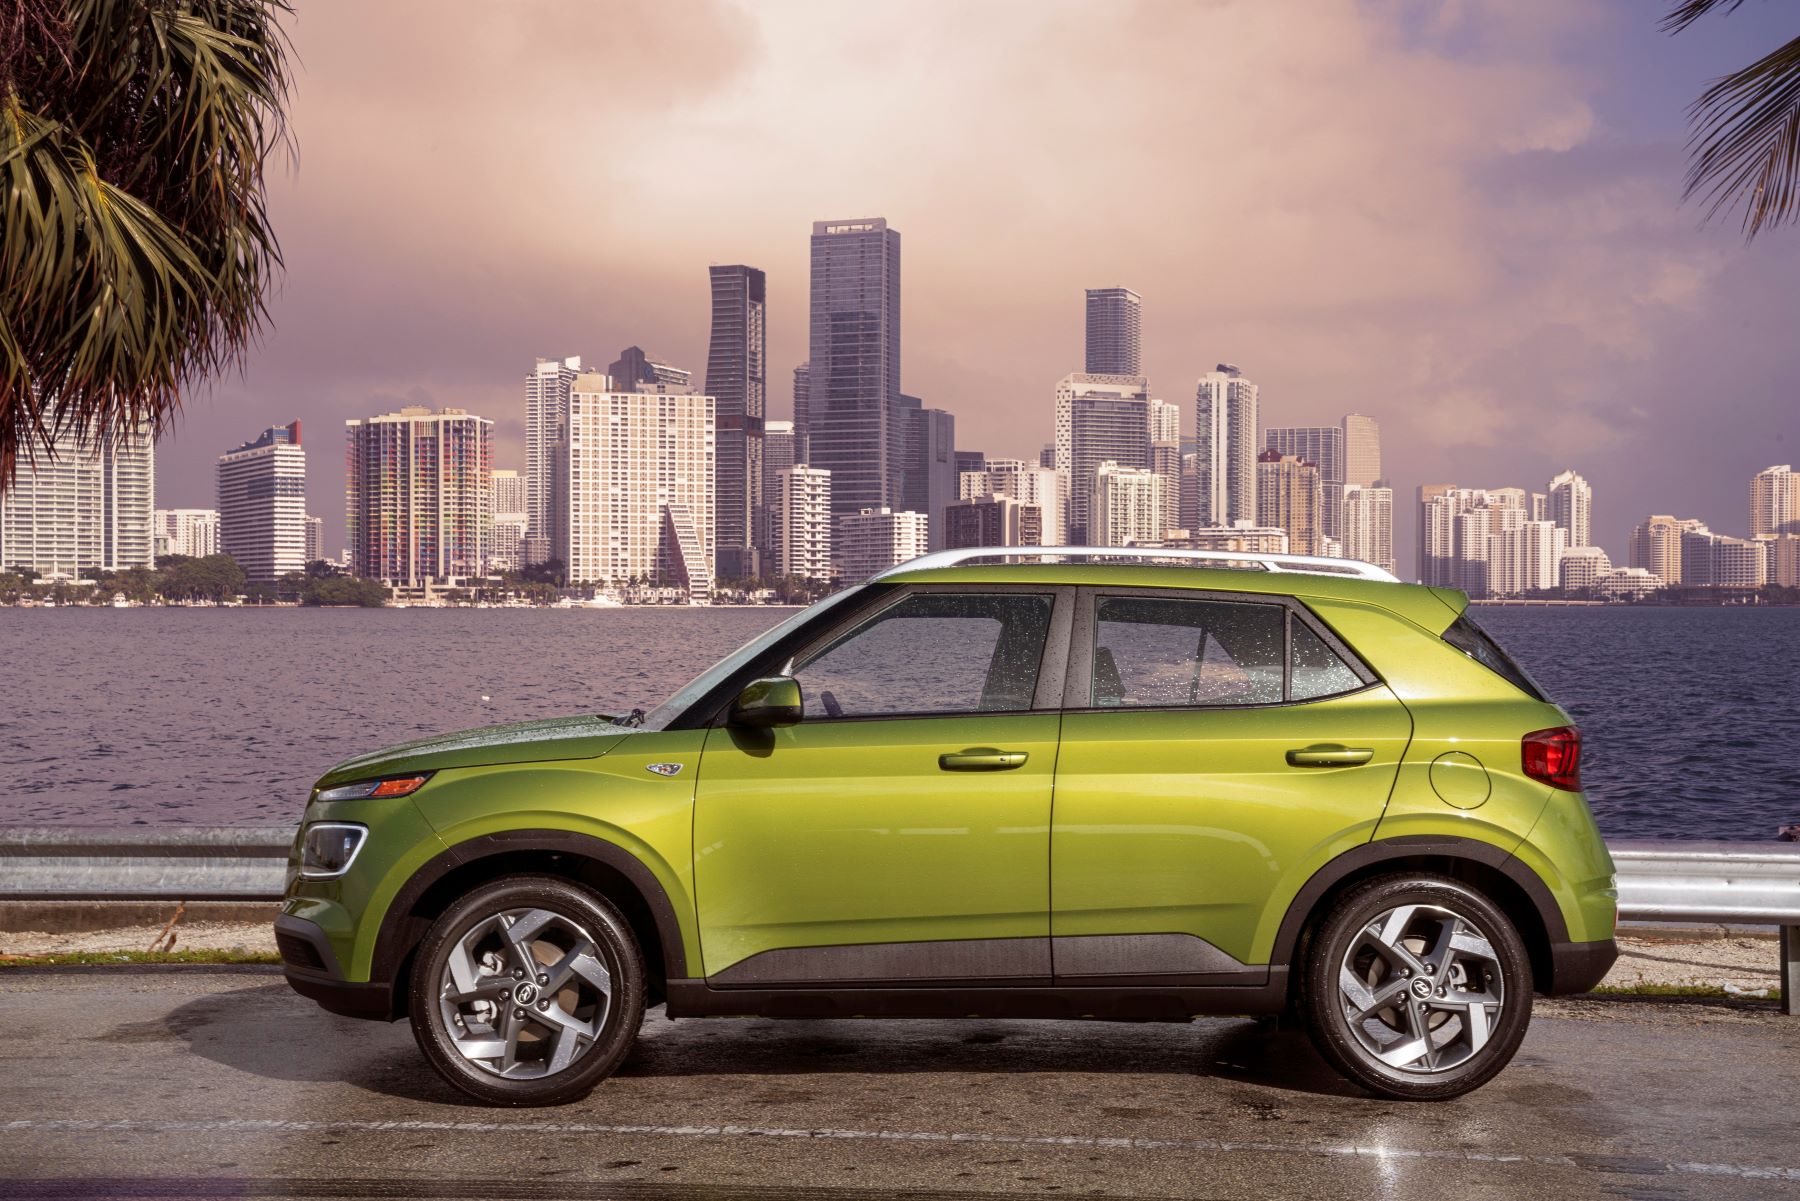 A sideshot of a green 2022 Hyundai Venue subcompact SUV model parked by the water with a skyline background